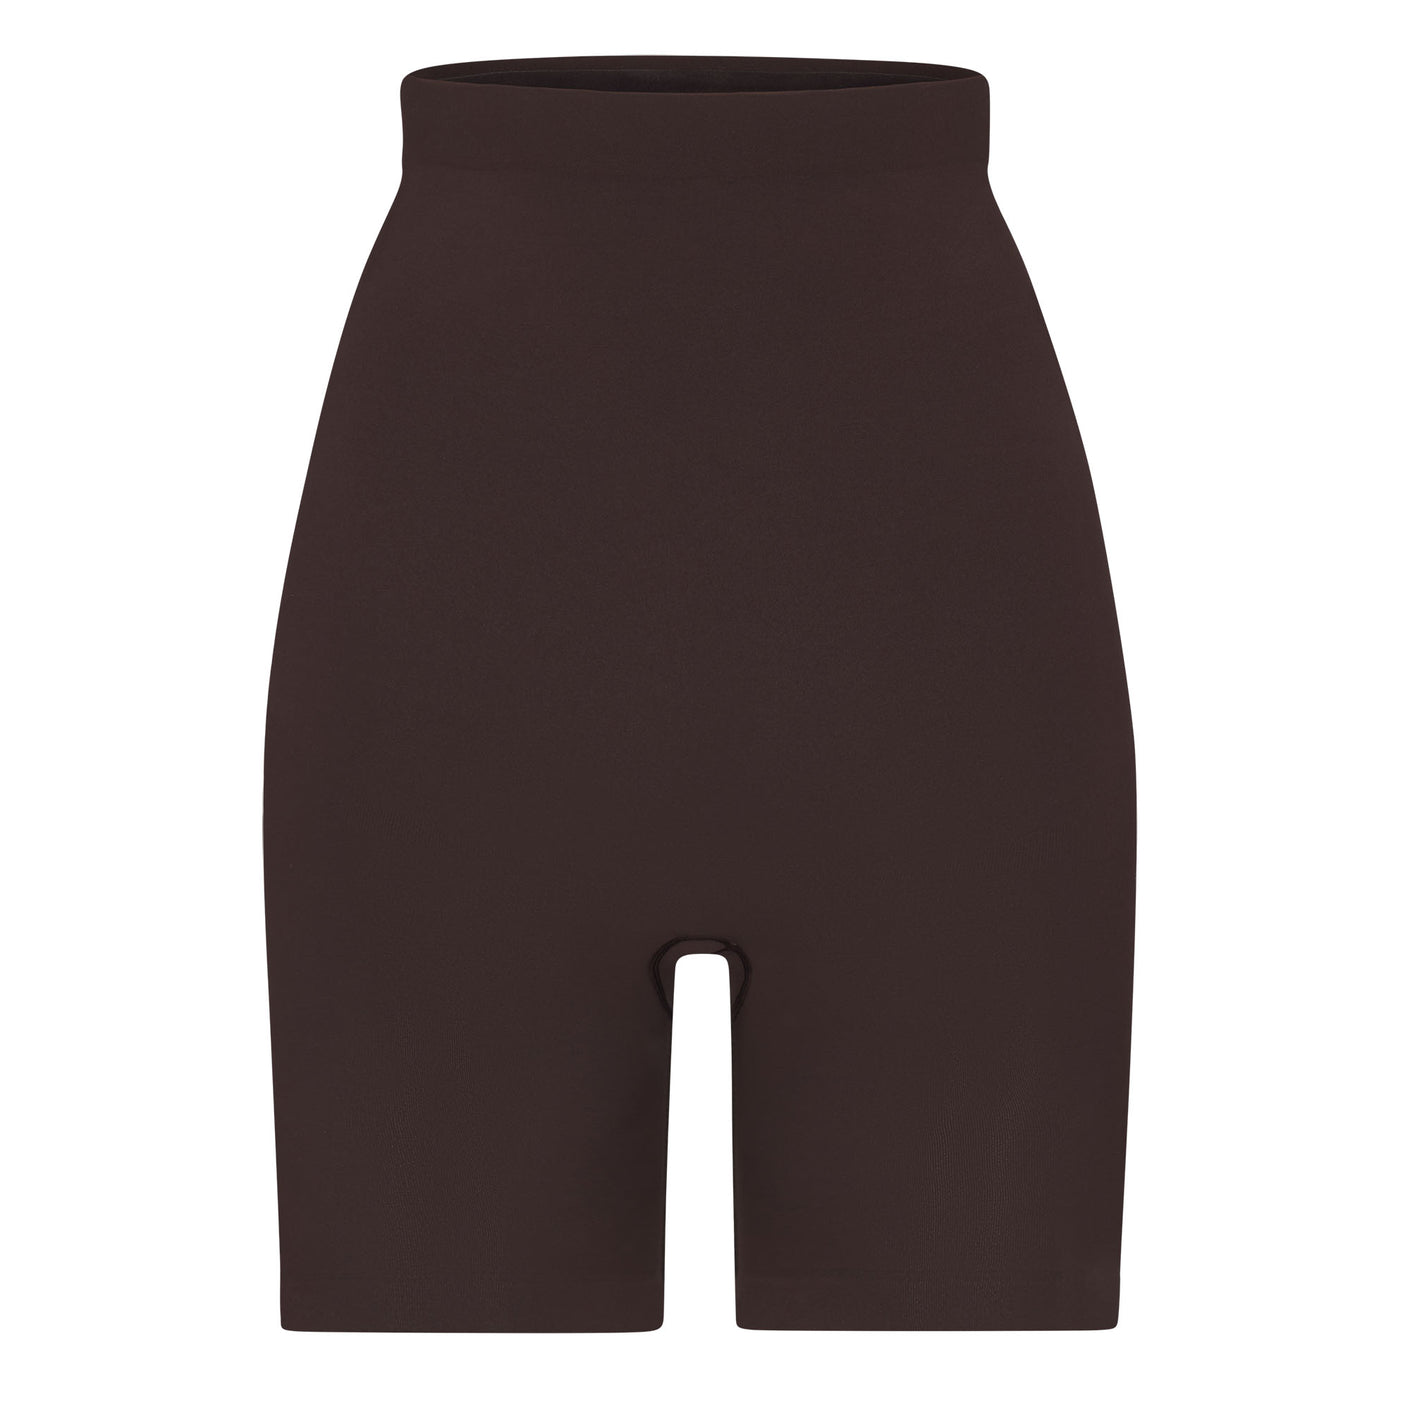 SKIMS New Everyday Seamless Sculpt High Waist Above the Knee Short Sand  Small - $35 - From Tiffany